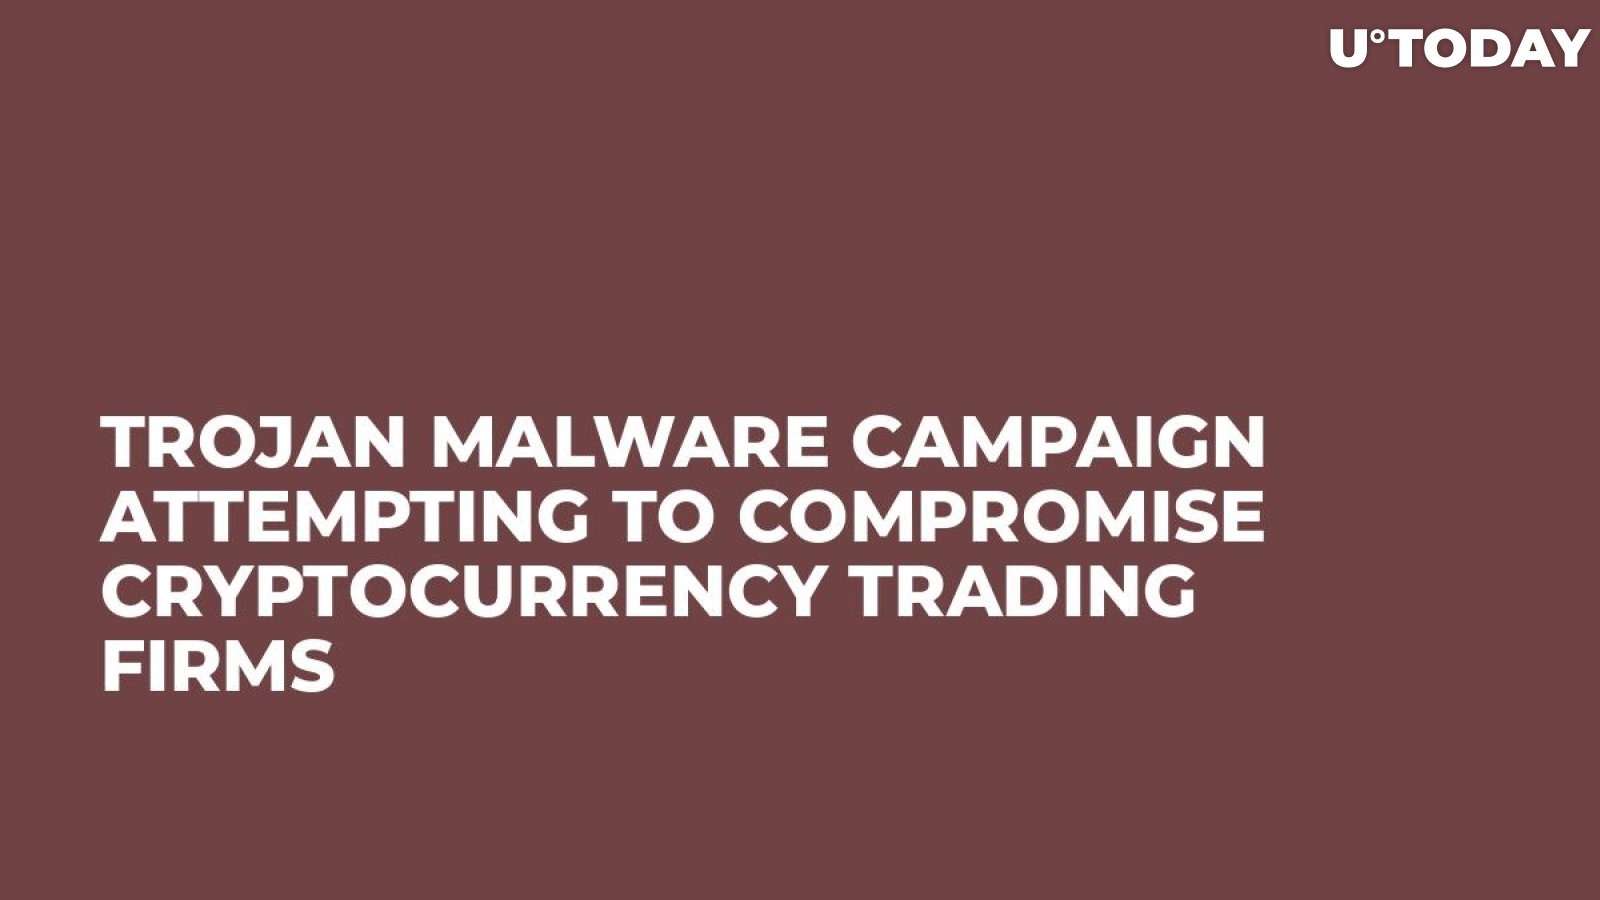 Trojan Malware Campaign Attempting to Compromise Cryptocurrency Trading Firms